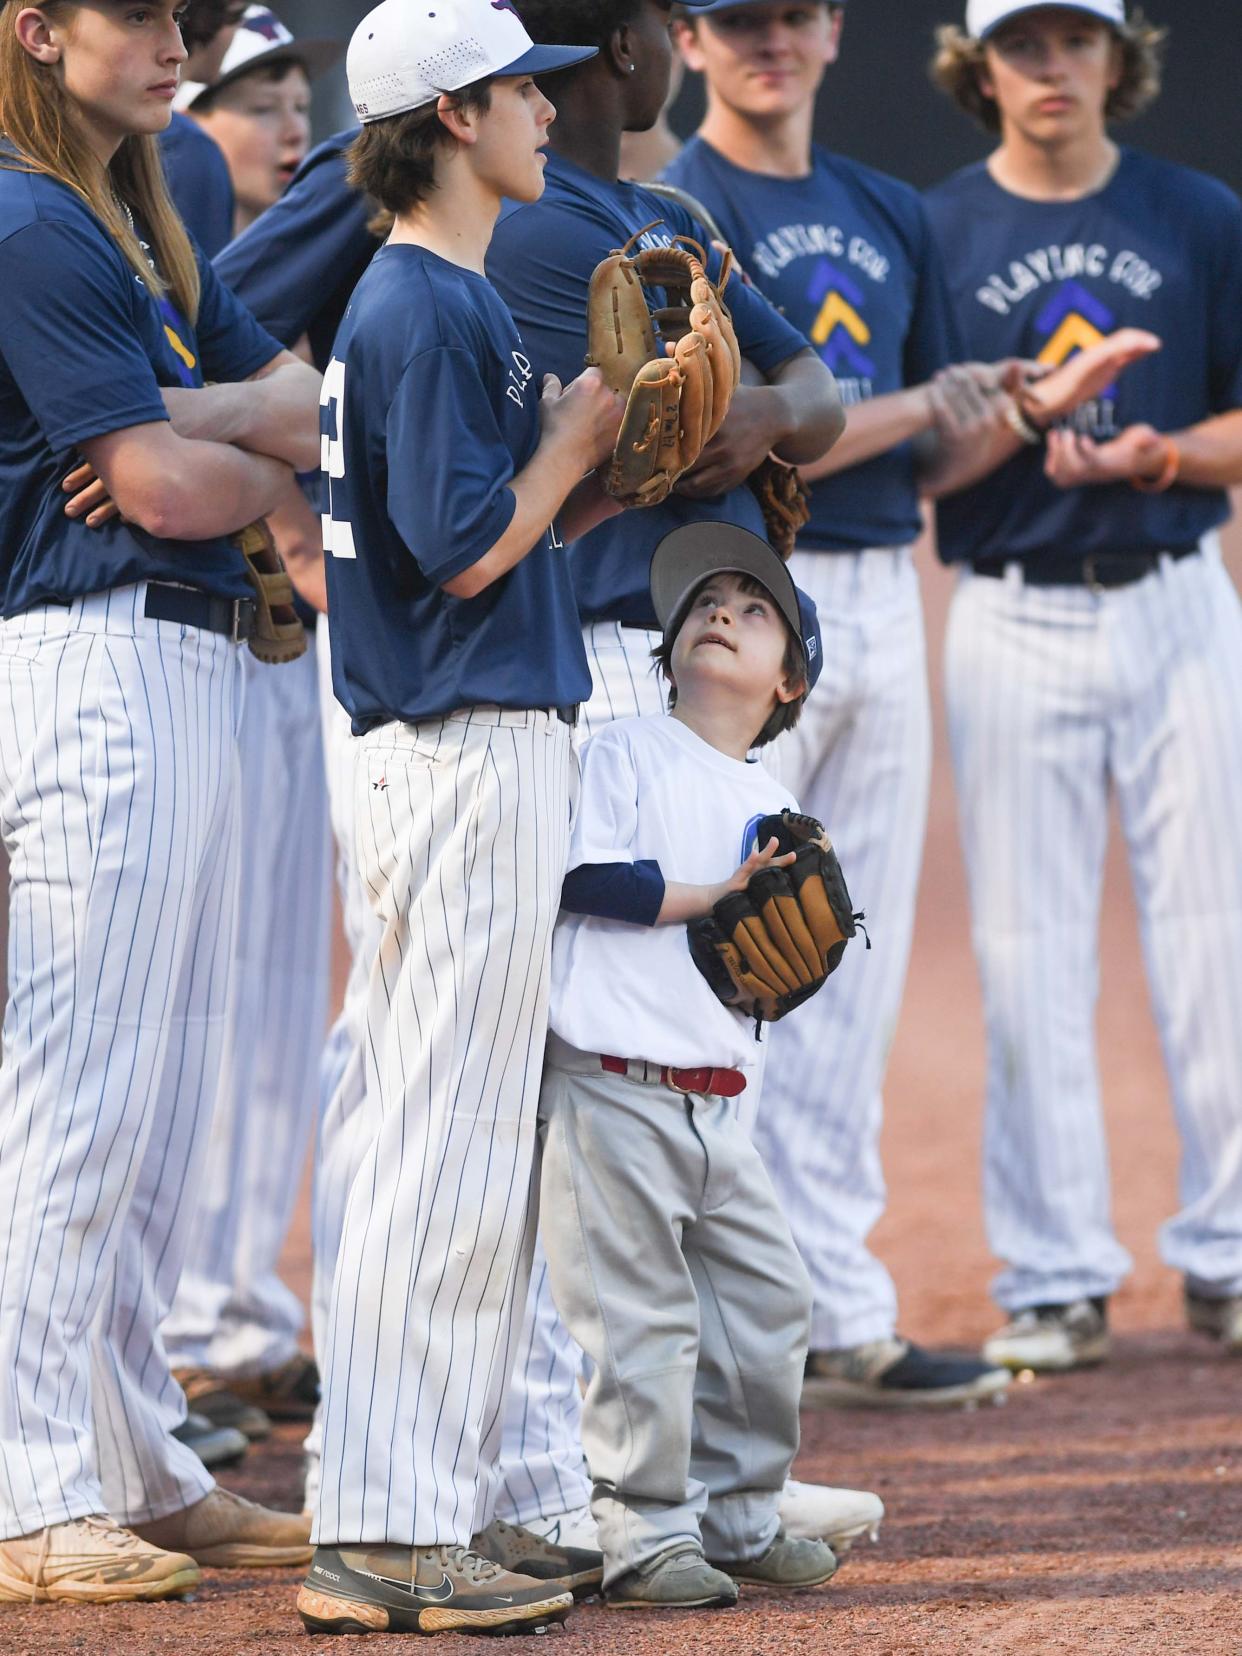 Will Clark, 7 years old with Down syndrome, looks up to his older brother Garrett as Madison starters are introduced during the WES's Game match in The Ball Park at Jackson, in Jackson, Tenn., on Thursday, March 21, 2024.